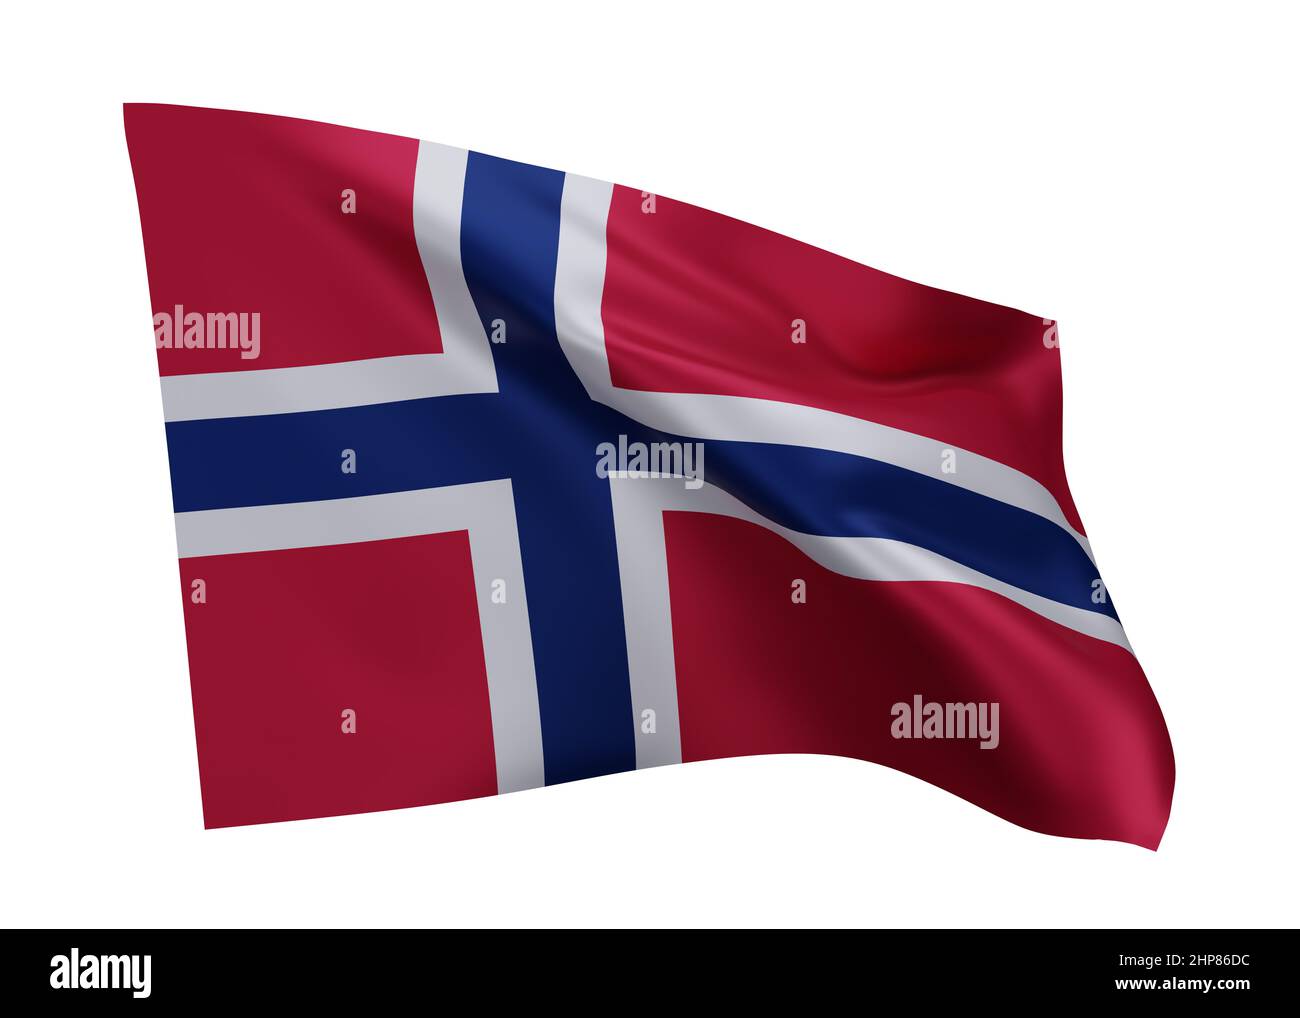 3d illustration flag of Norway. Norway high resolution flag isolated against white background. 3d rendering Stock Photo